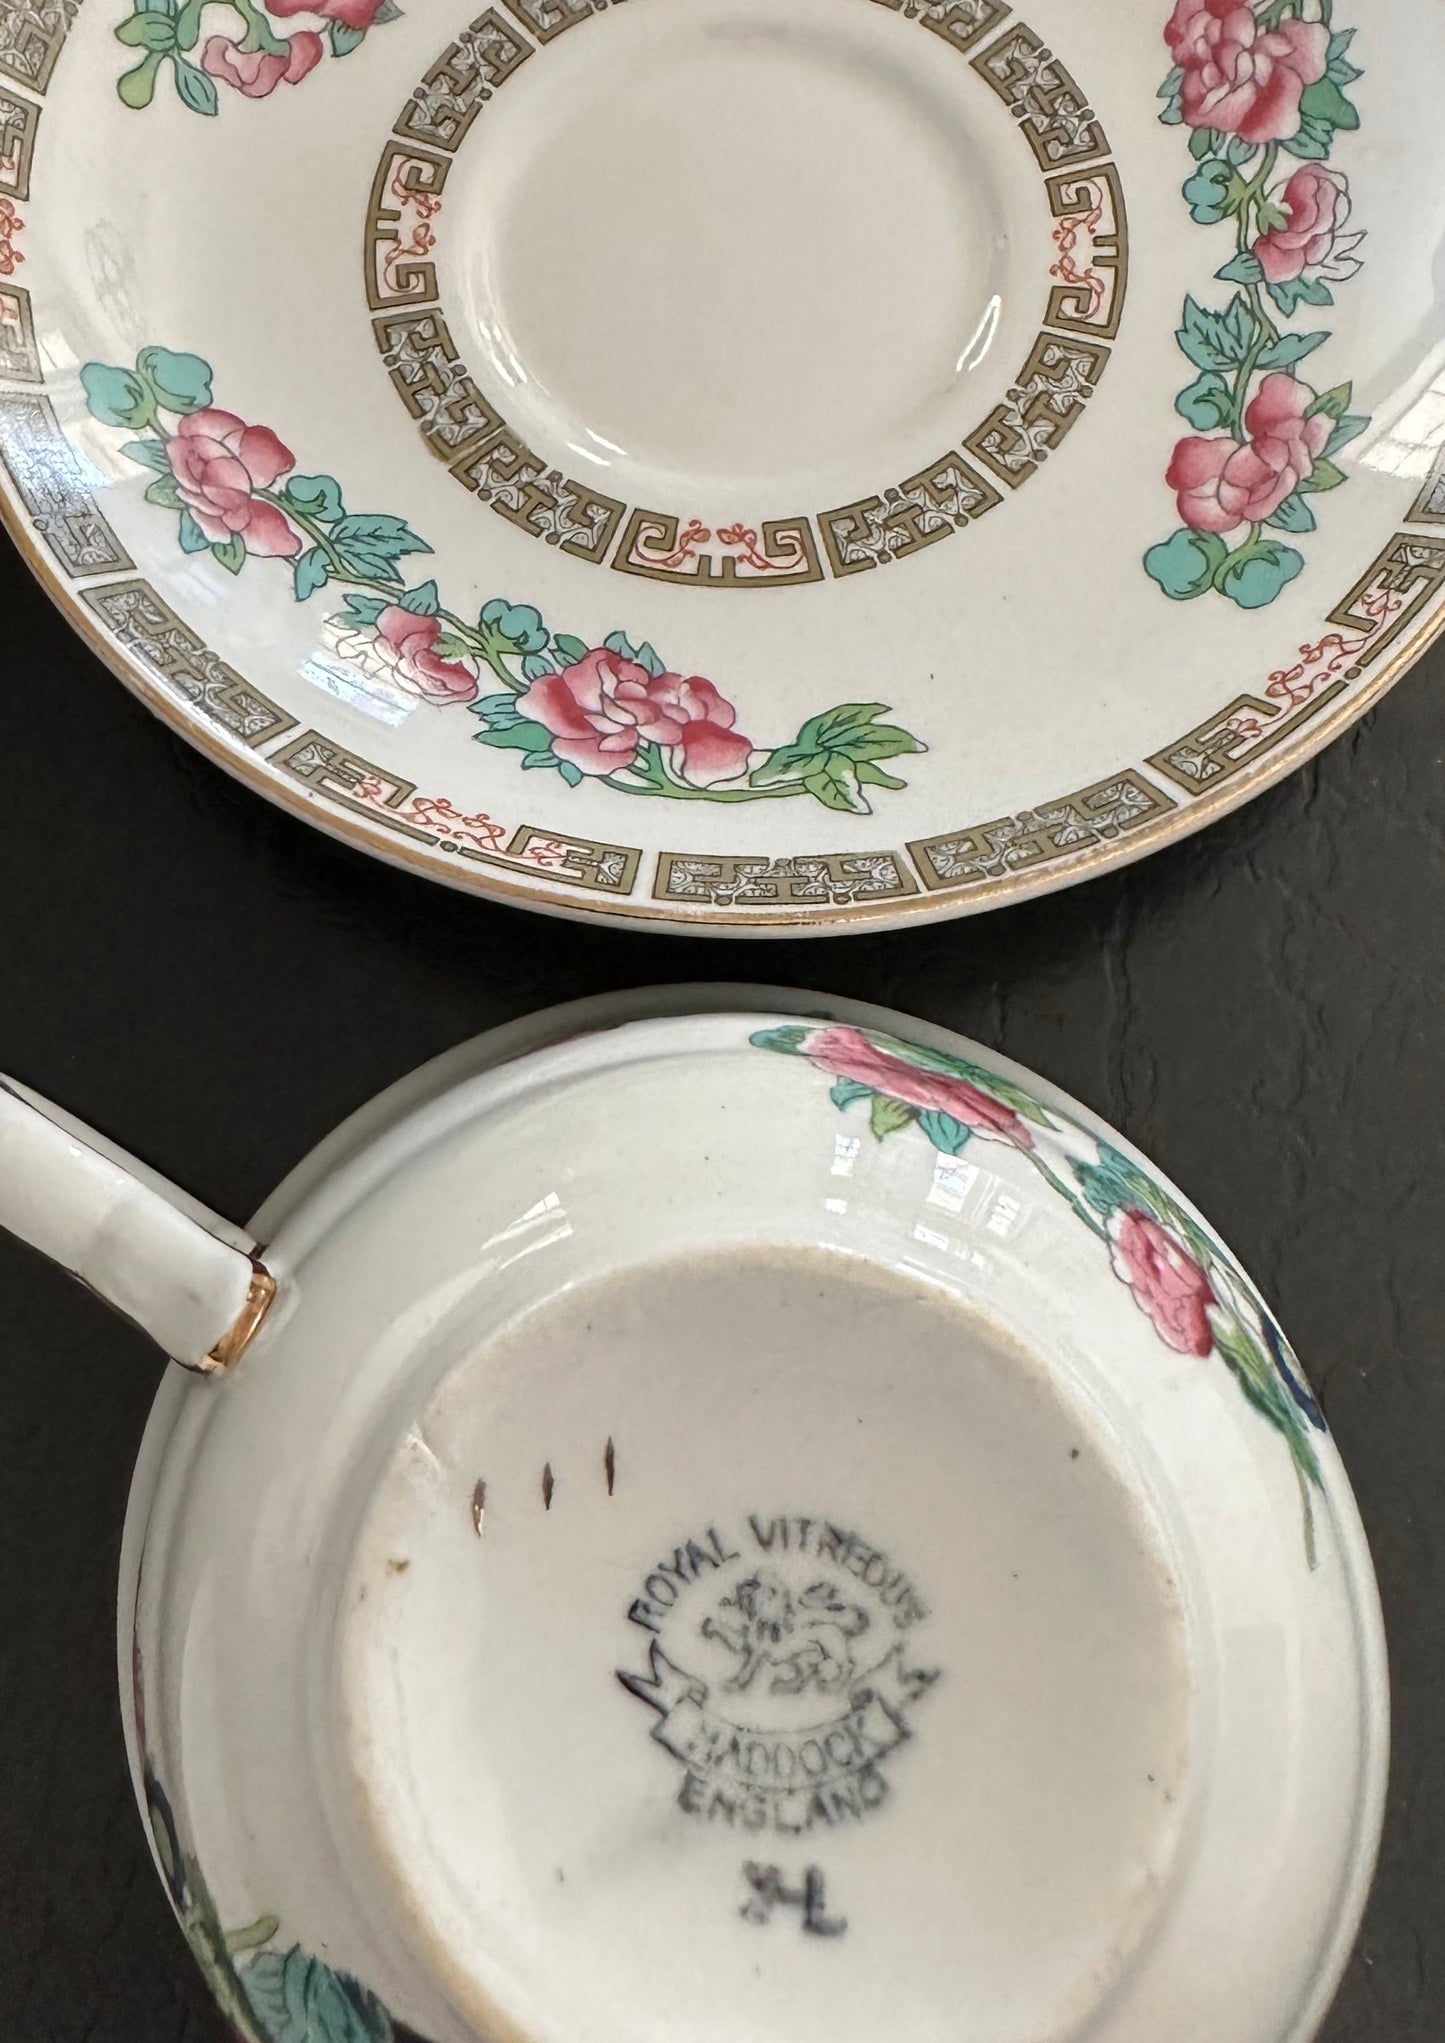 Tea Cups and Soucers with Indian Tree design and Gold Trim by John Maddock and Sons #IndianTree #JohnMaddock #VintageTeaSet - DharBazaar